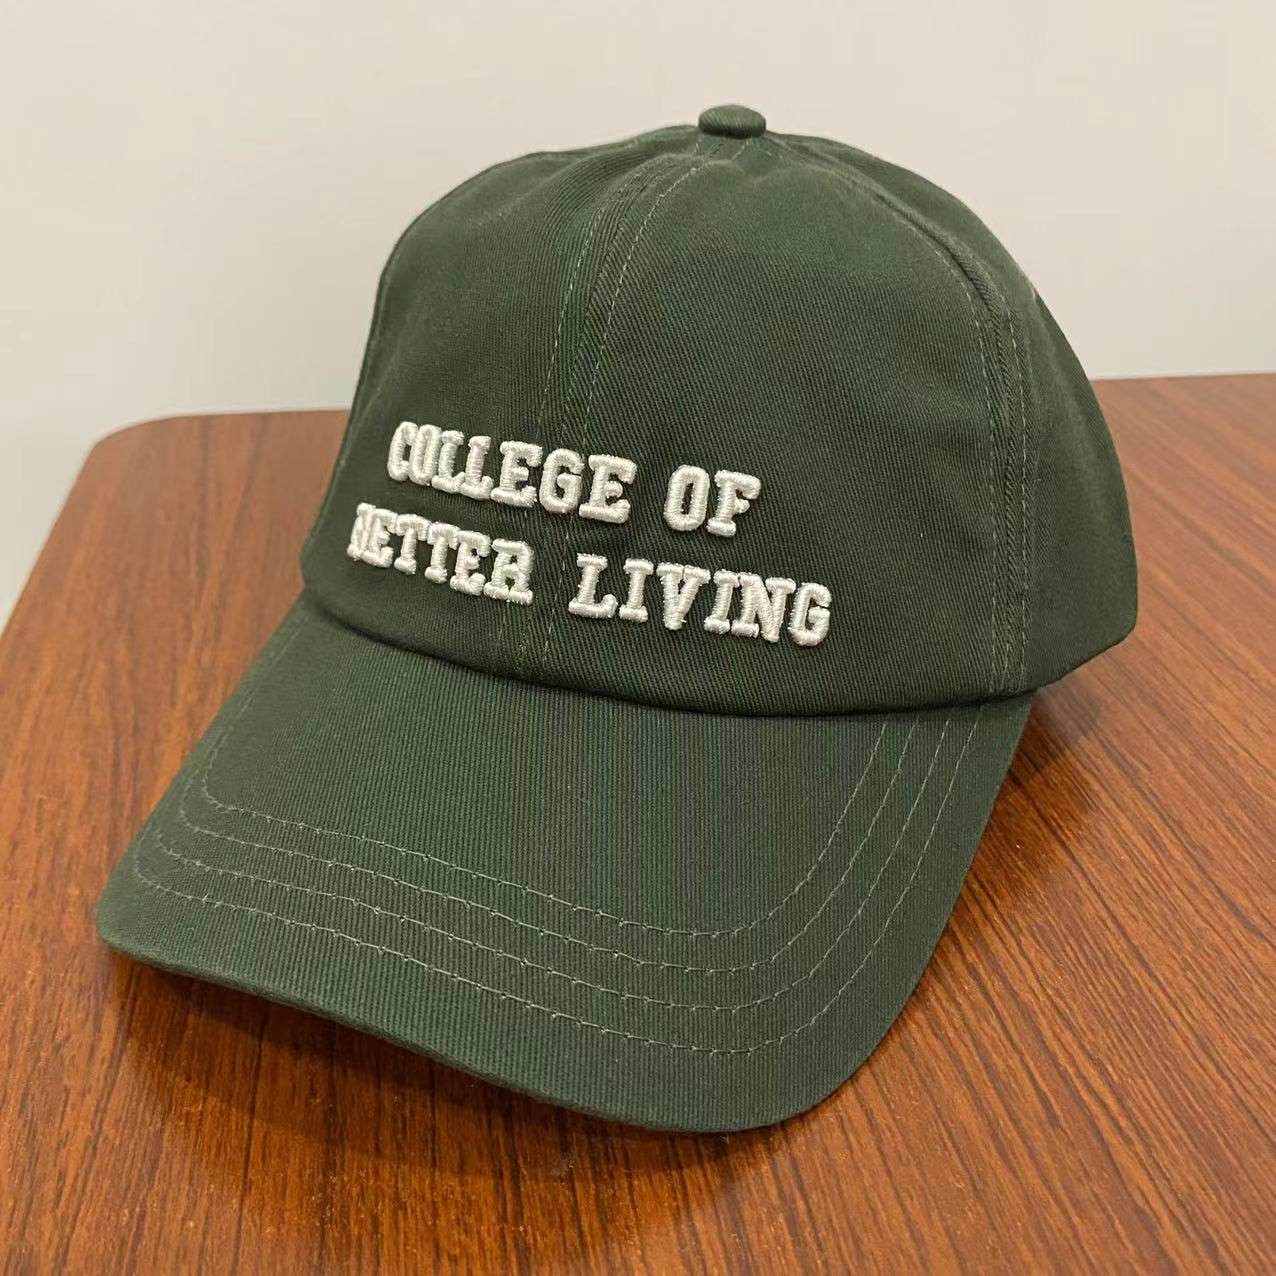 Germany CLOSED College of Better Living Oval Green Baseball hat